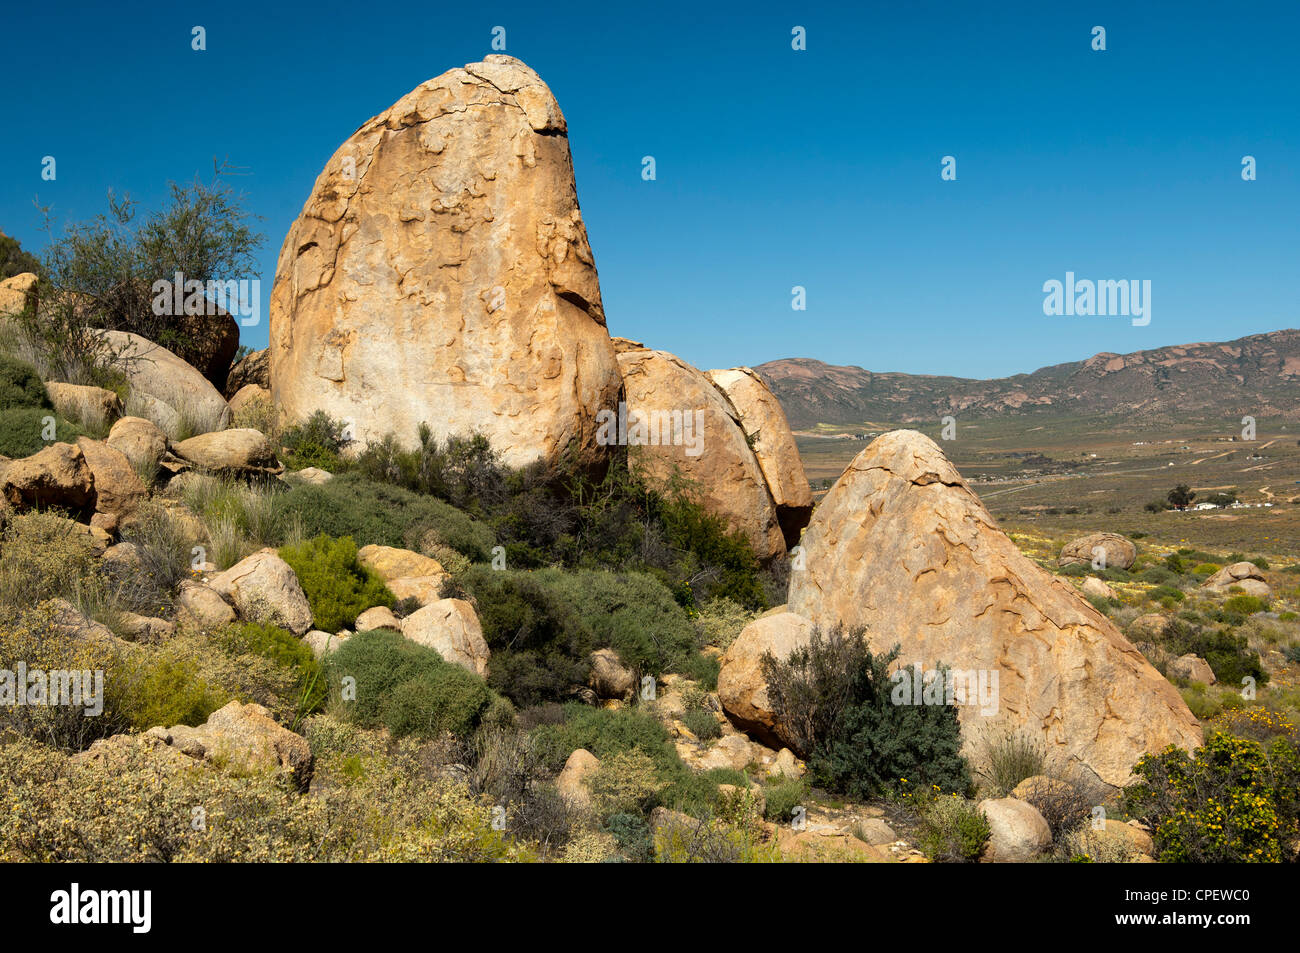 Weathered granite boulders in the semi-desert landscape of Namaqualand, Springbok, Northern Cape province, South Africa Stock Photo